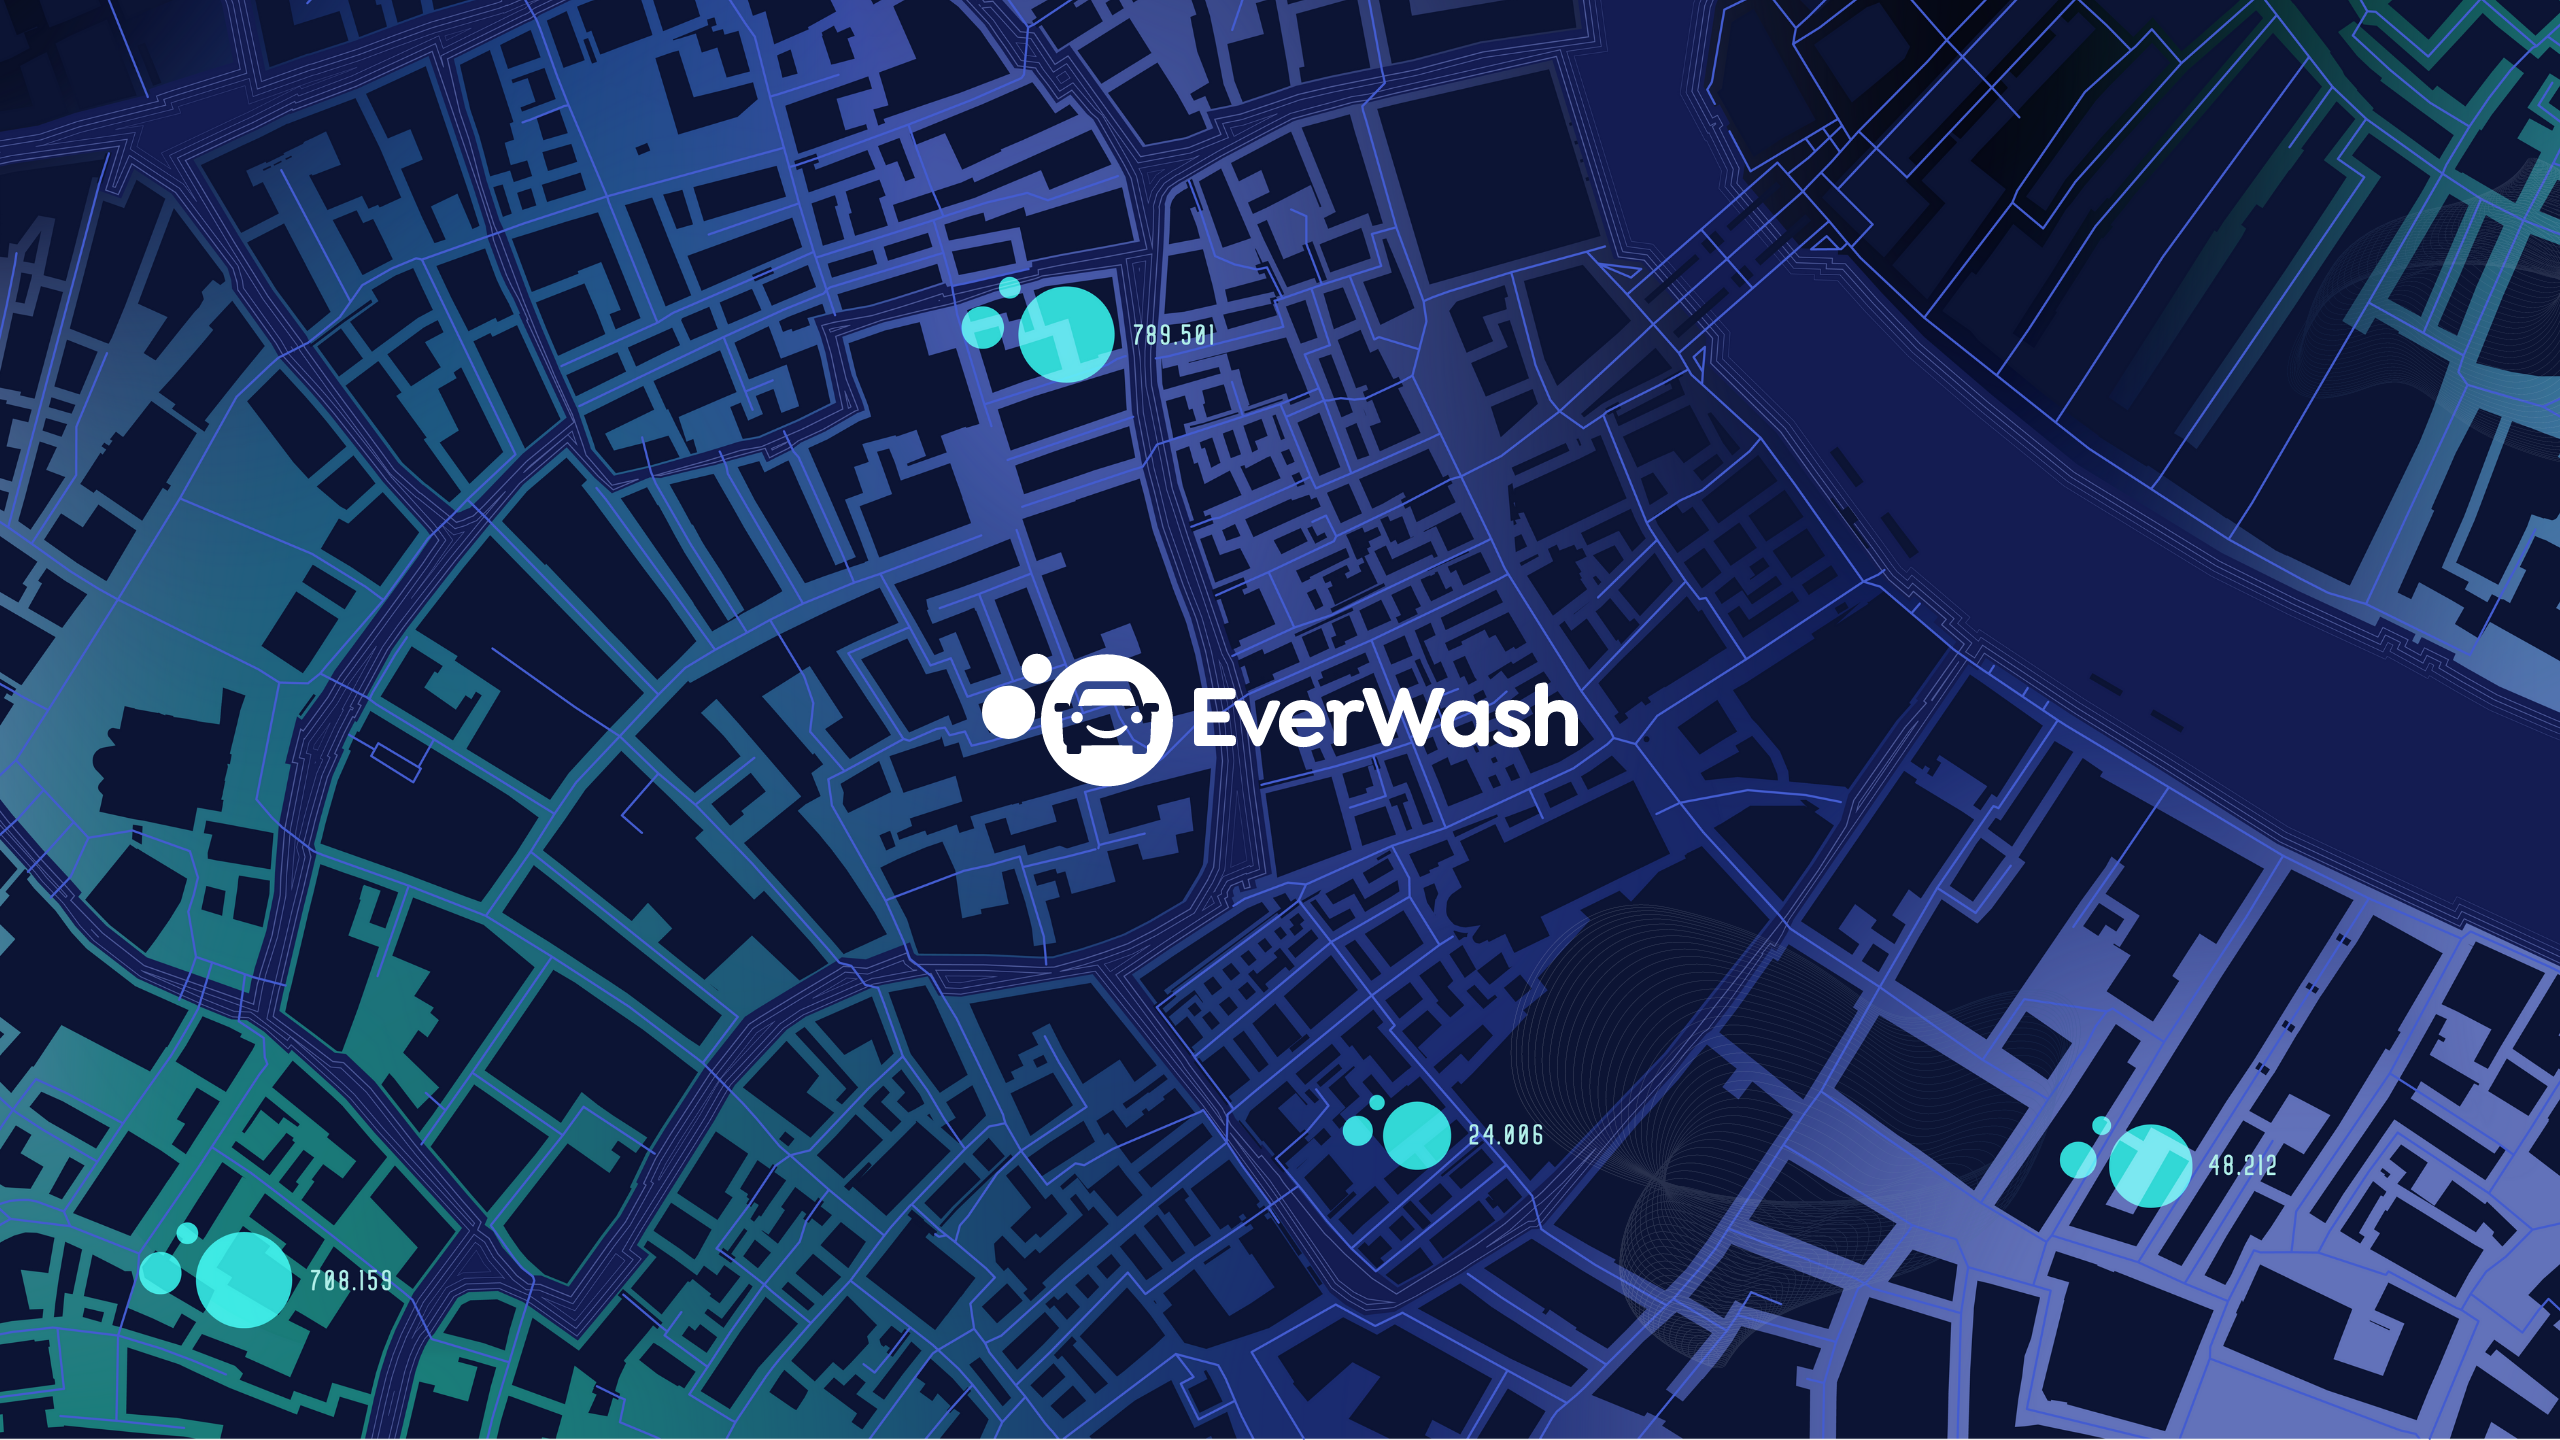 EverWash had a busy year in 2022